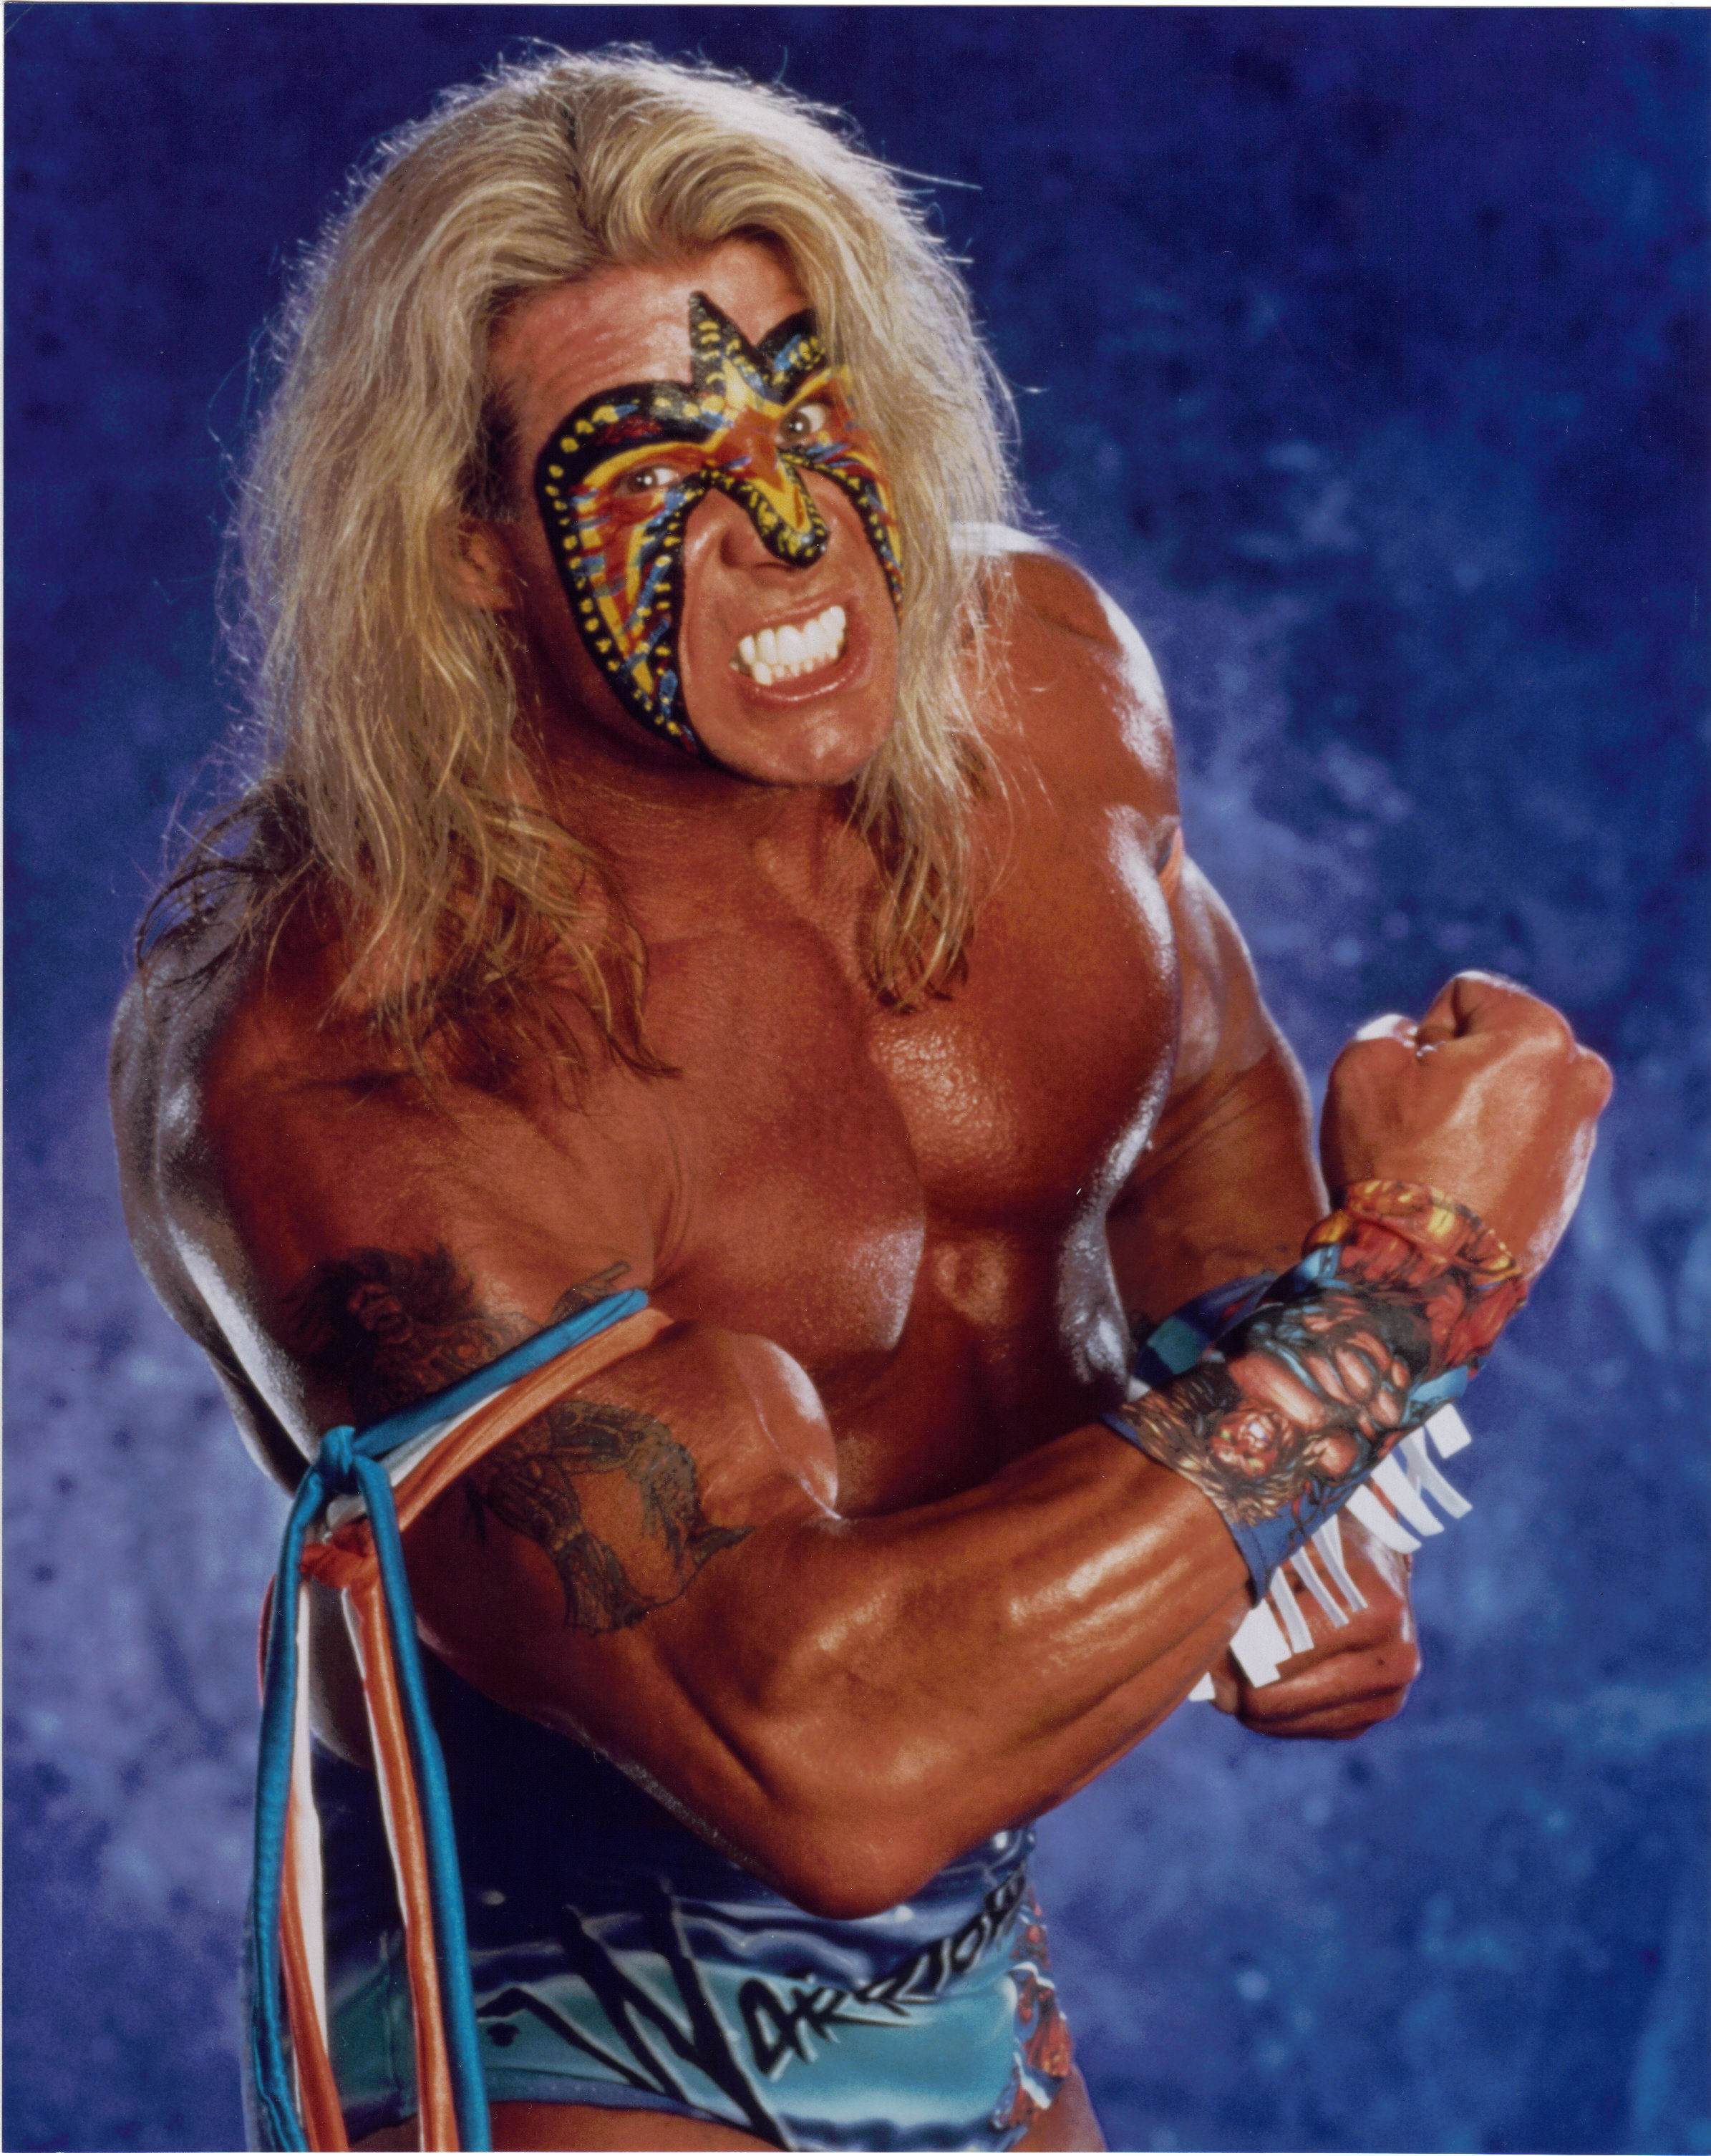 Tribute To The Ultimate Warrior Wallpaper Hd Wallpapers Images, Photos, Reviews